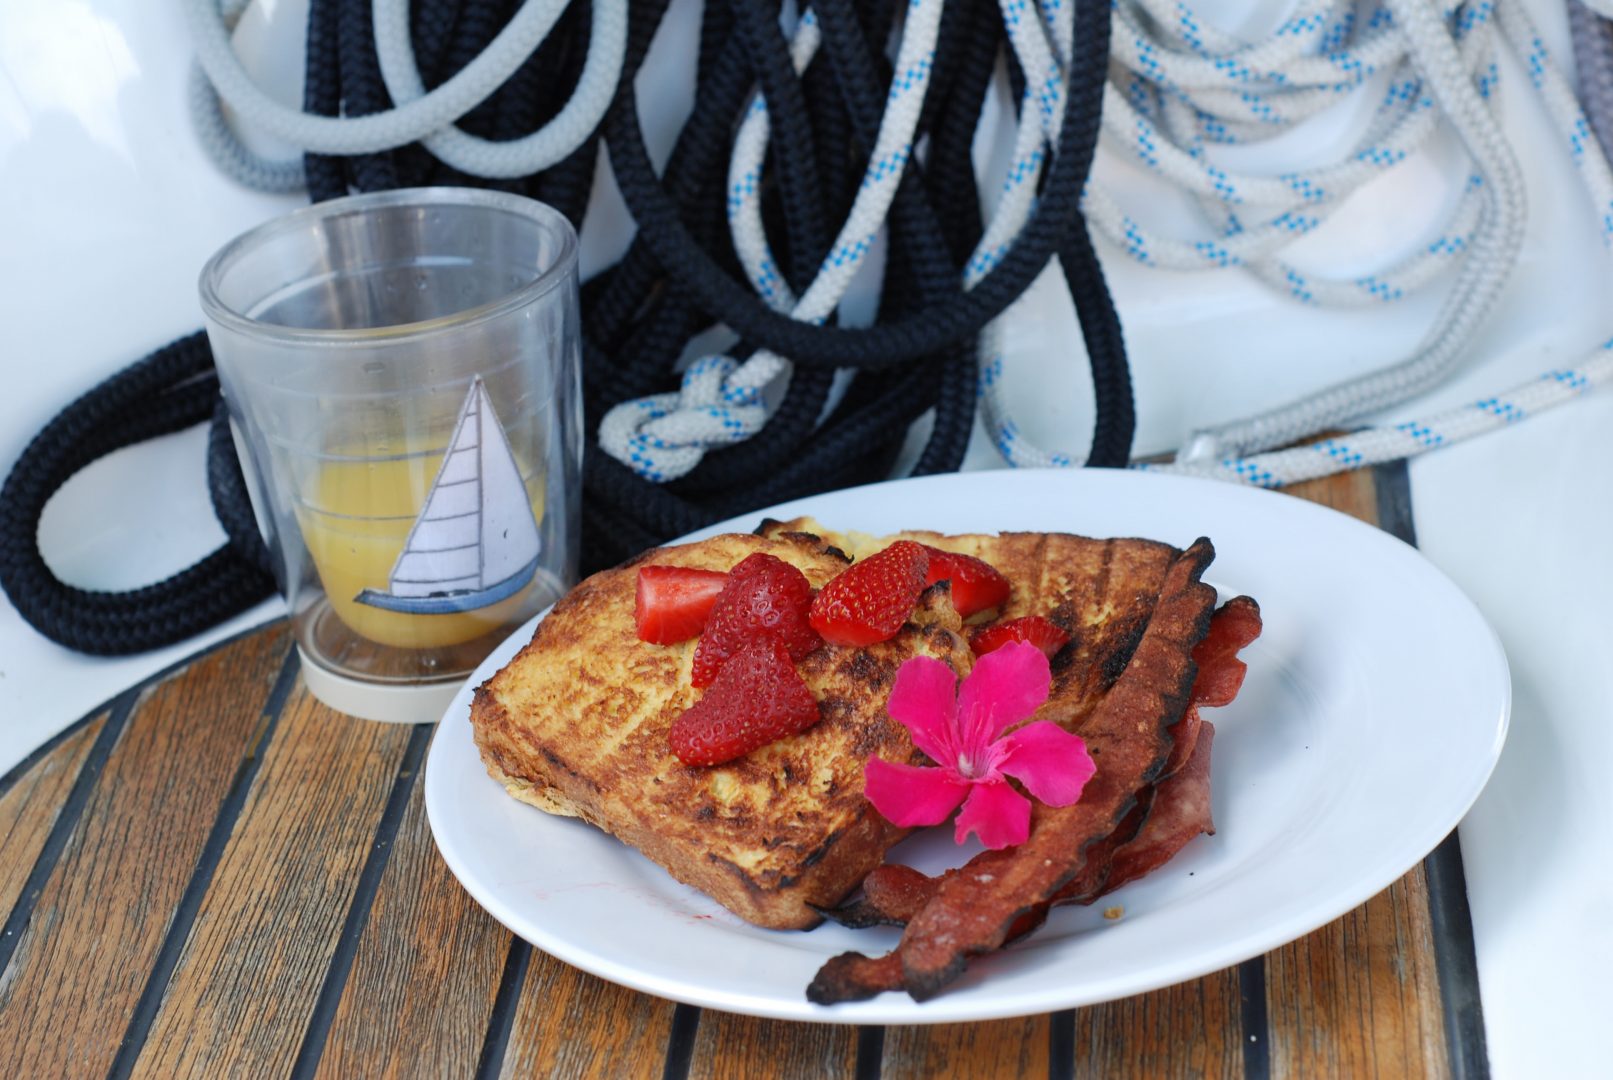 Grilled Bimini Bread French Toast